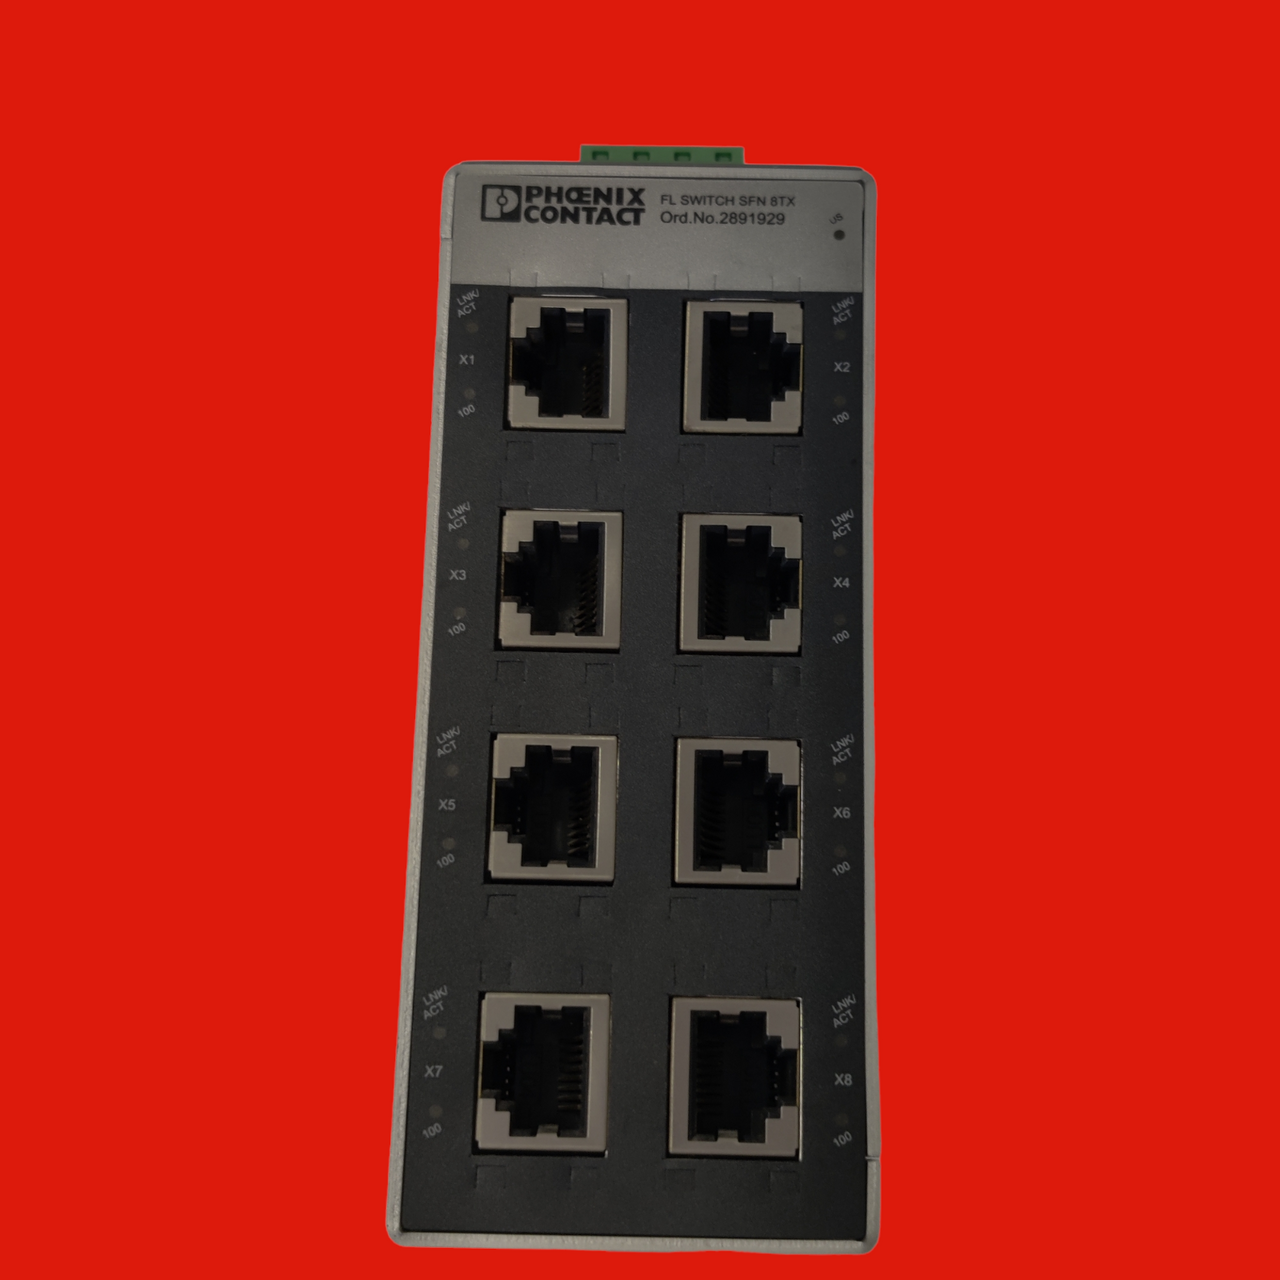 Phoenix Contact Industrial FL SWITCH SFN-8TX Ethernet Switch